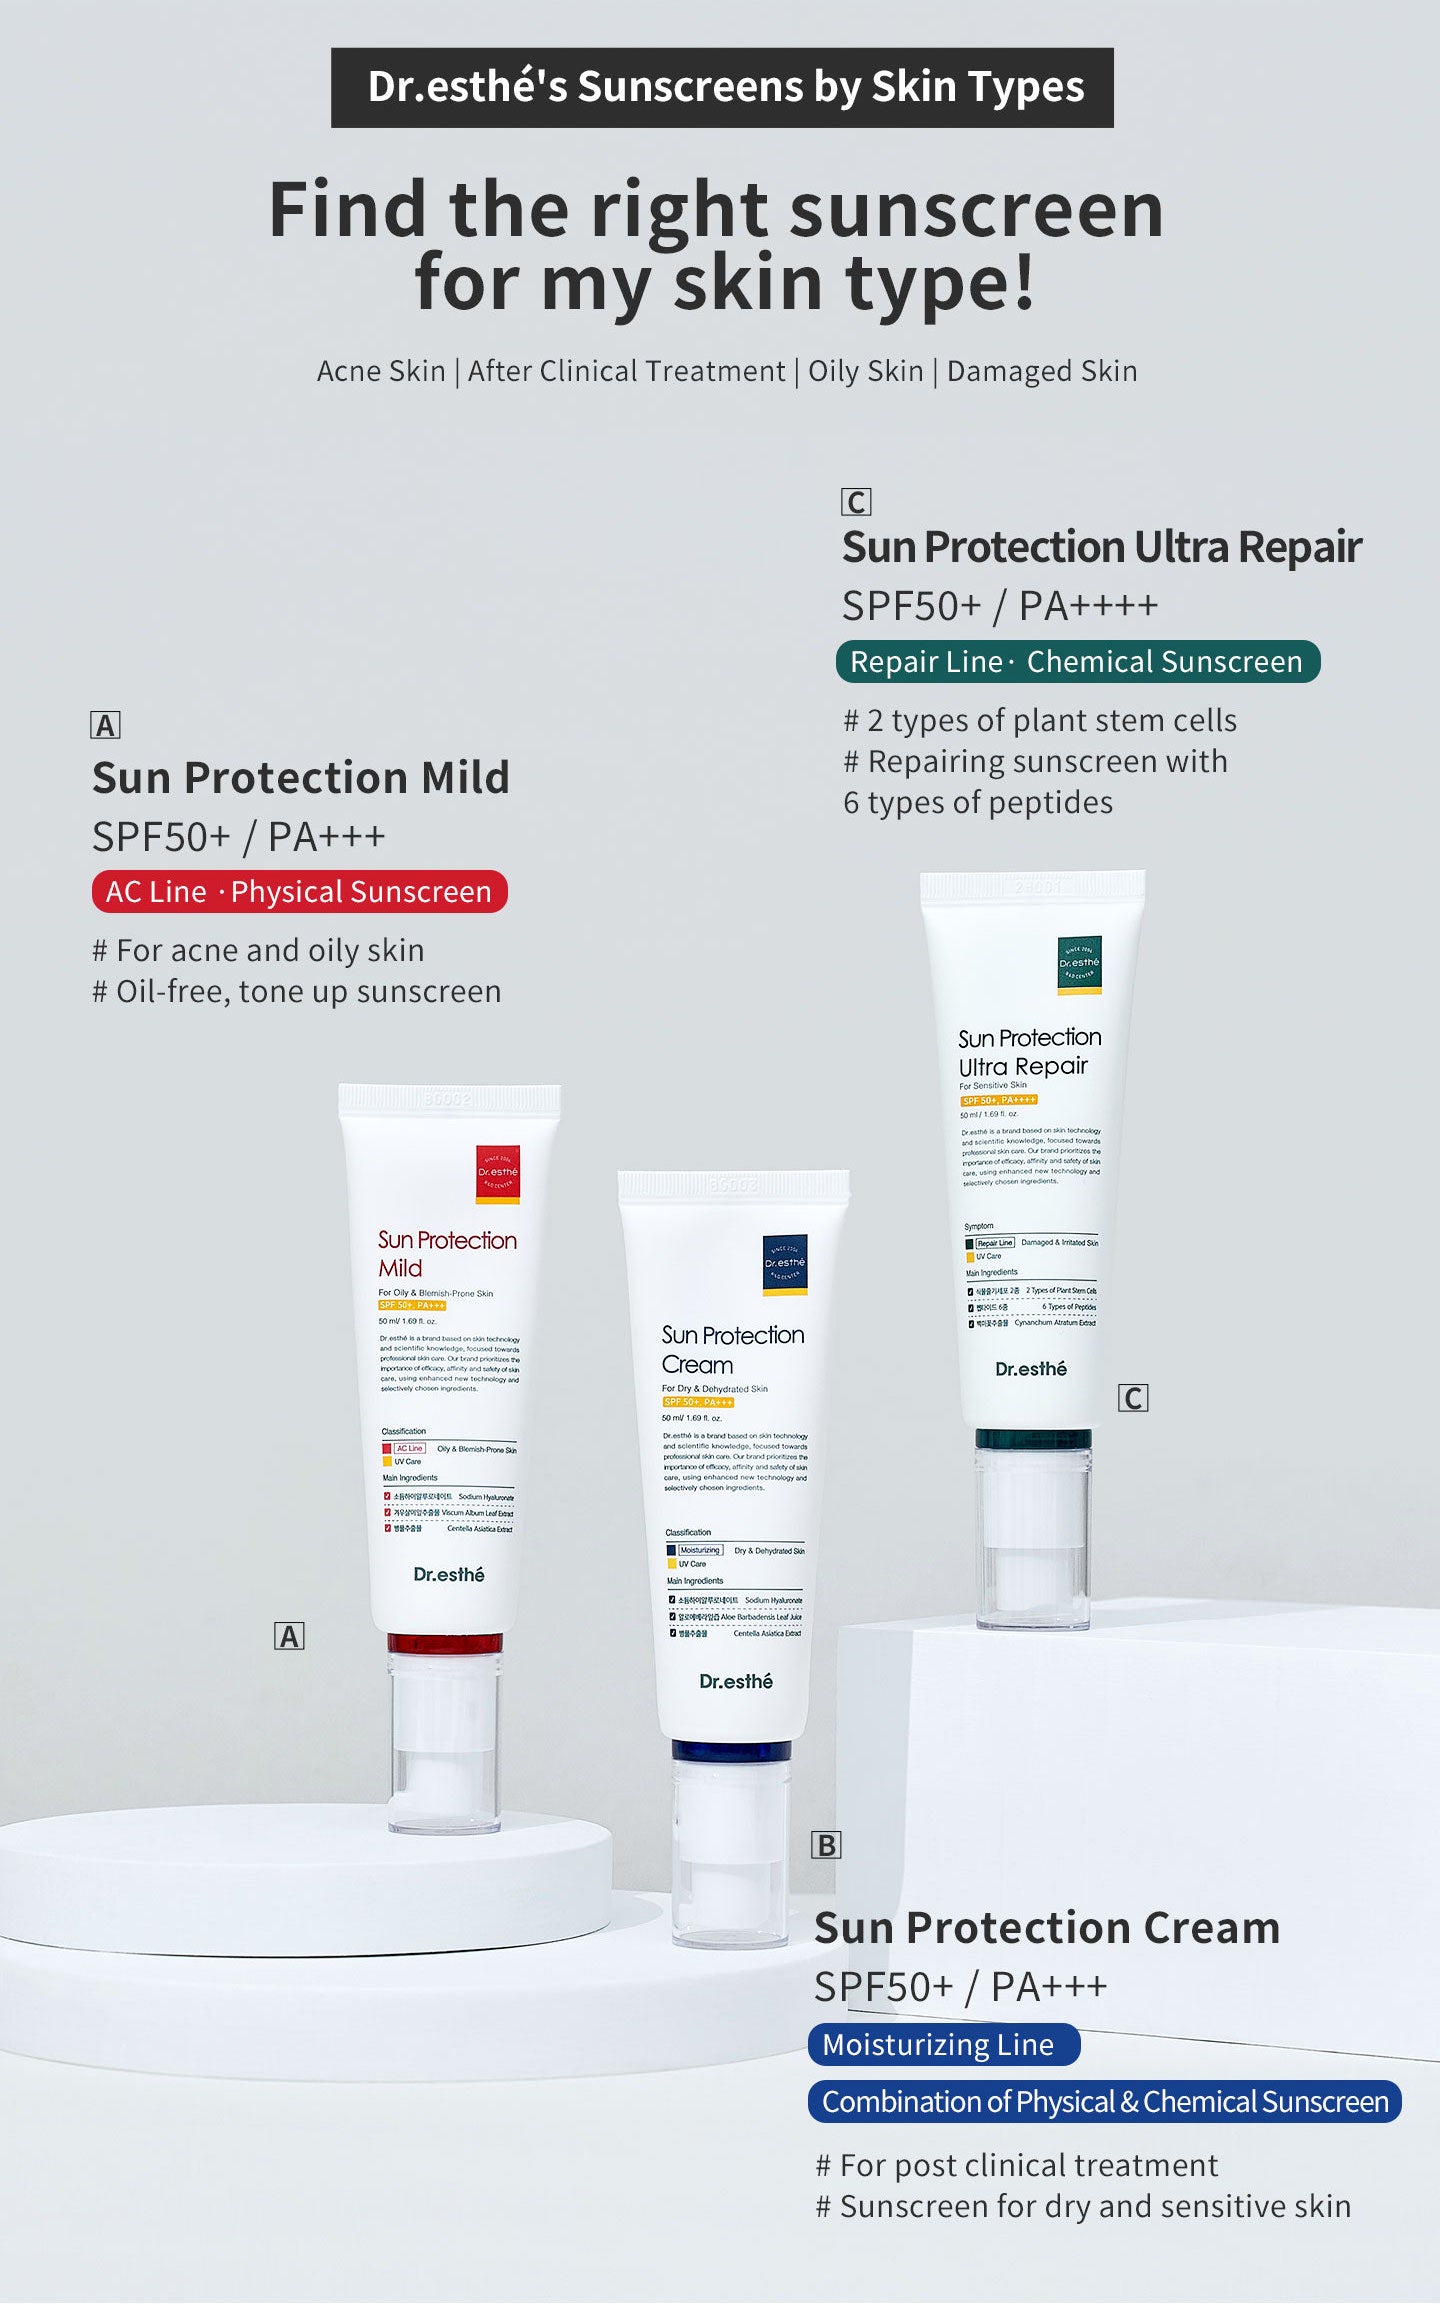 Find the right sunscreen for my skin type! AC line Sun protection mild, physical sunscreen. Moitsurizing line: sun protection cream combination of physical & chemical sunscreen. Repair line: Sun protection ultra repair chemical sunscreen.   